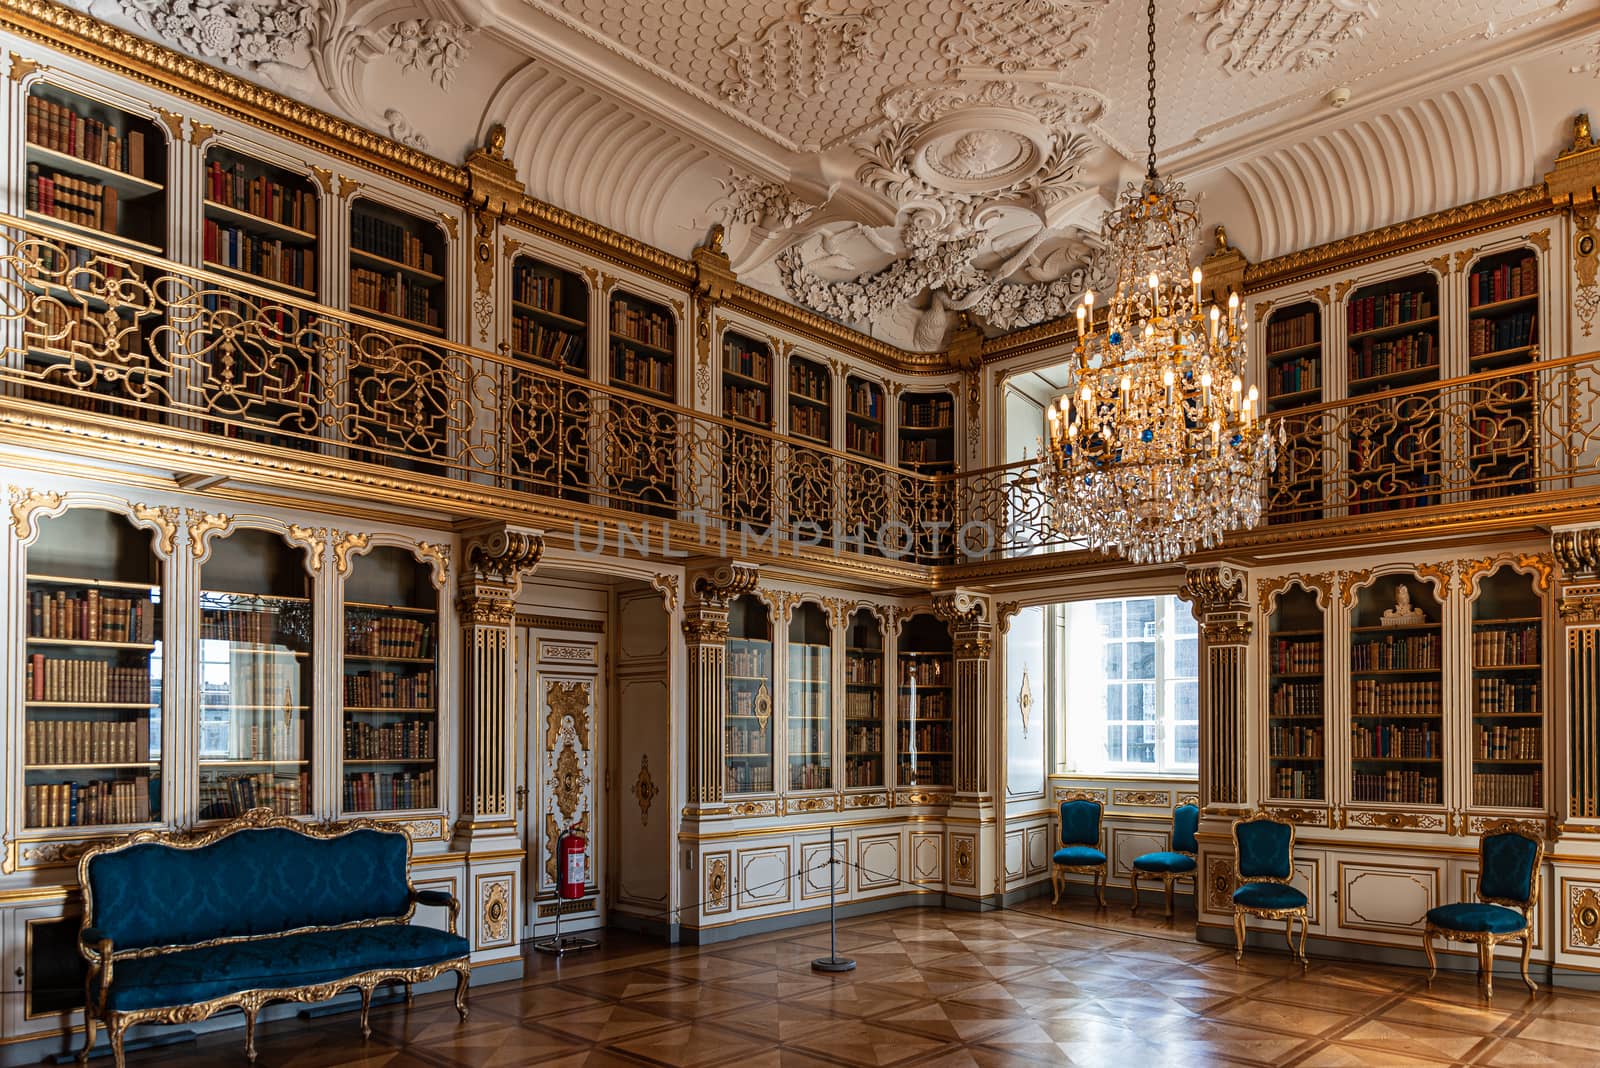 Interiors of the royal halls in the Christiansborg Palace in Cop by brambillasimone